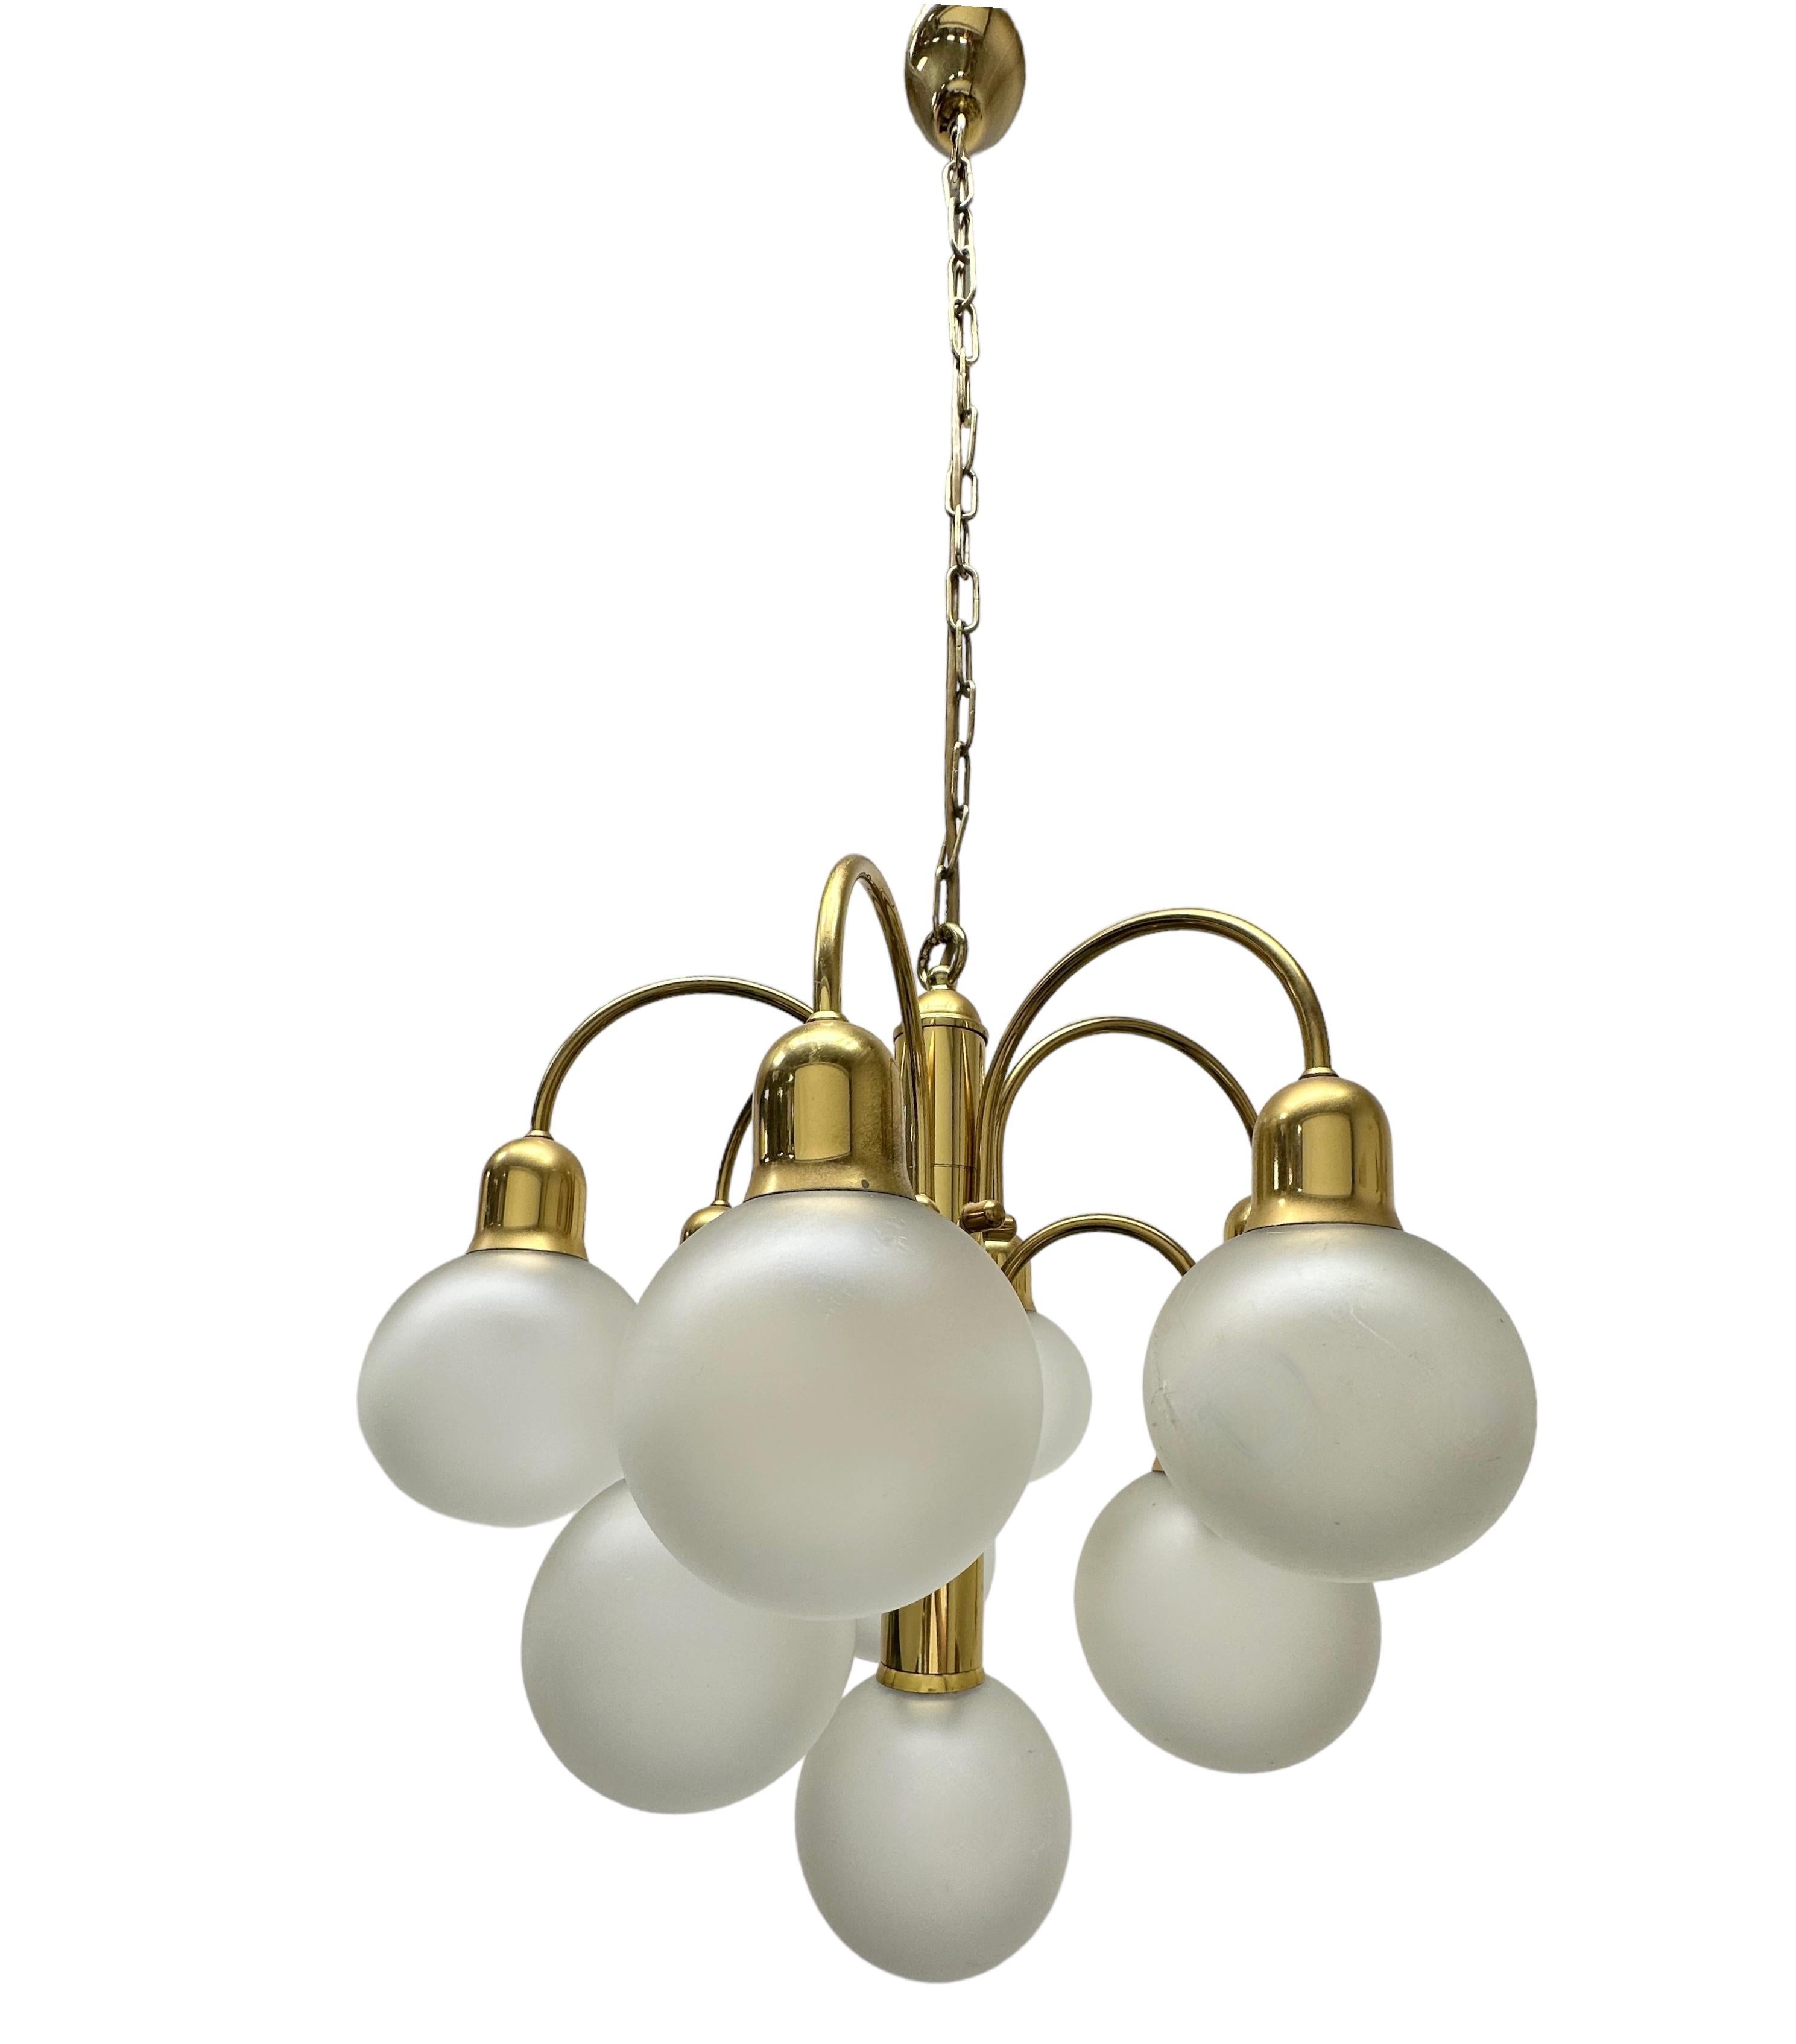 Late 20th Century 10 Light Sputnik Orbit Brass and Frosted Glass Ball Chandelier Germany, 1970s For Sale